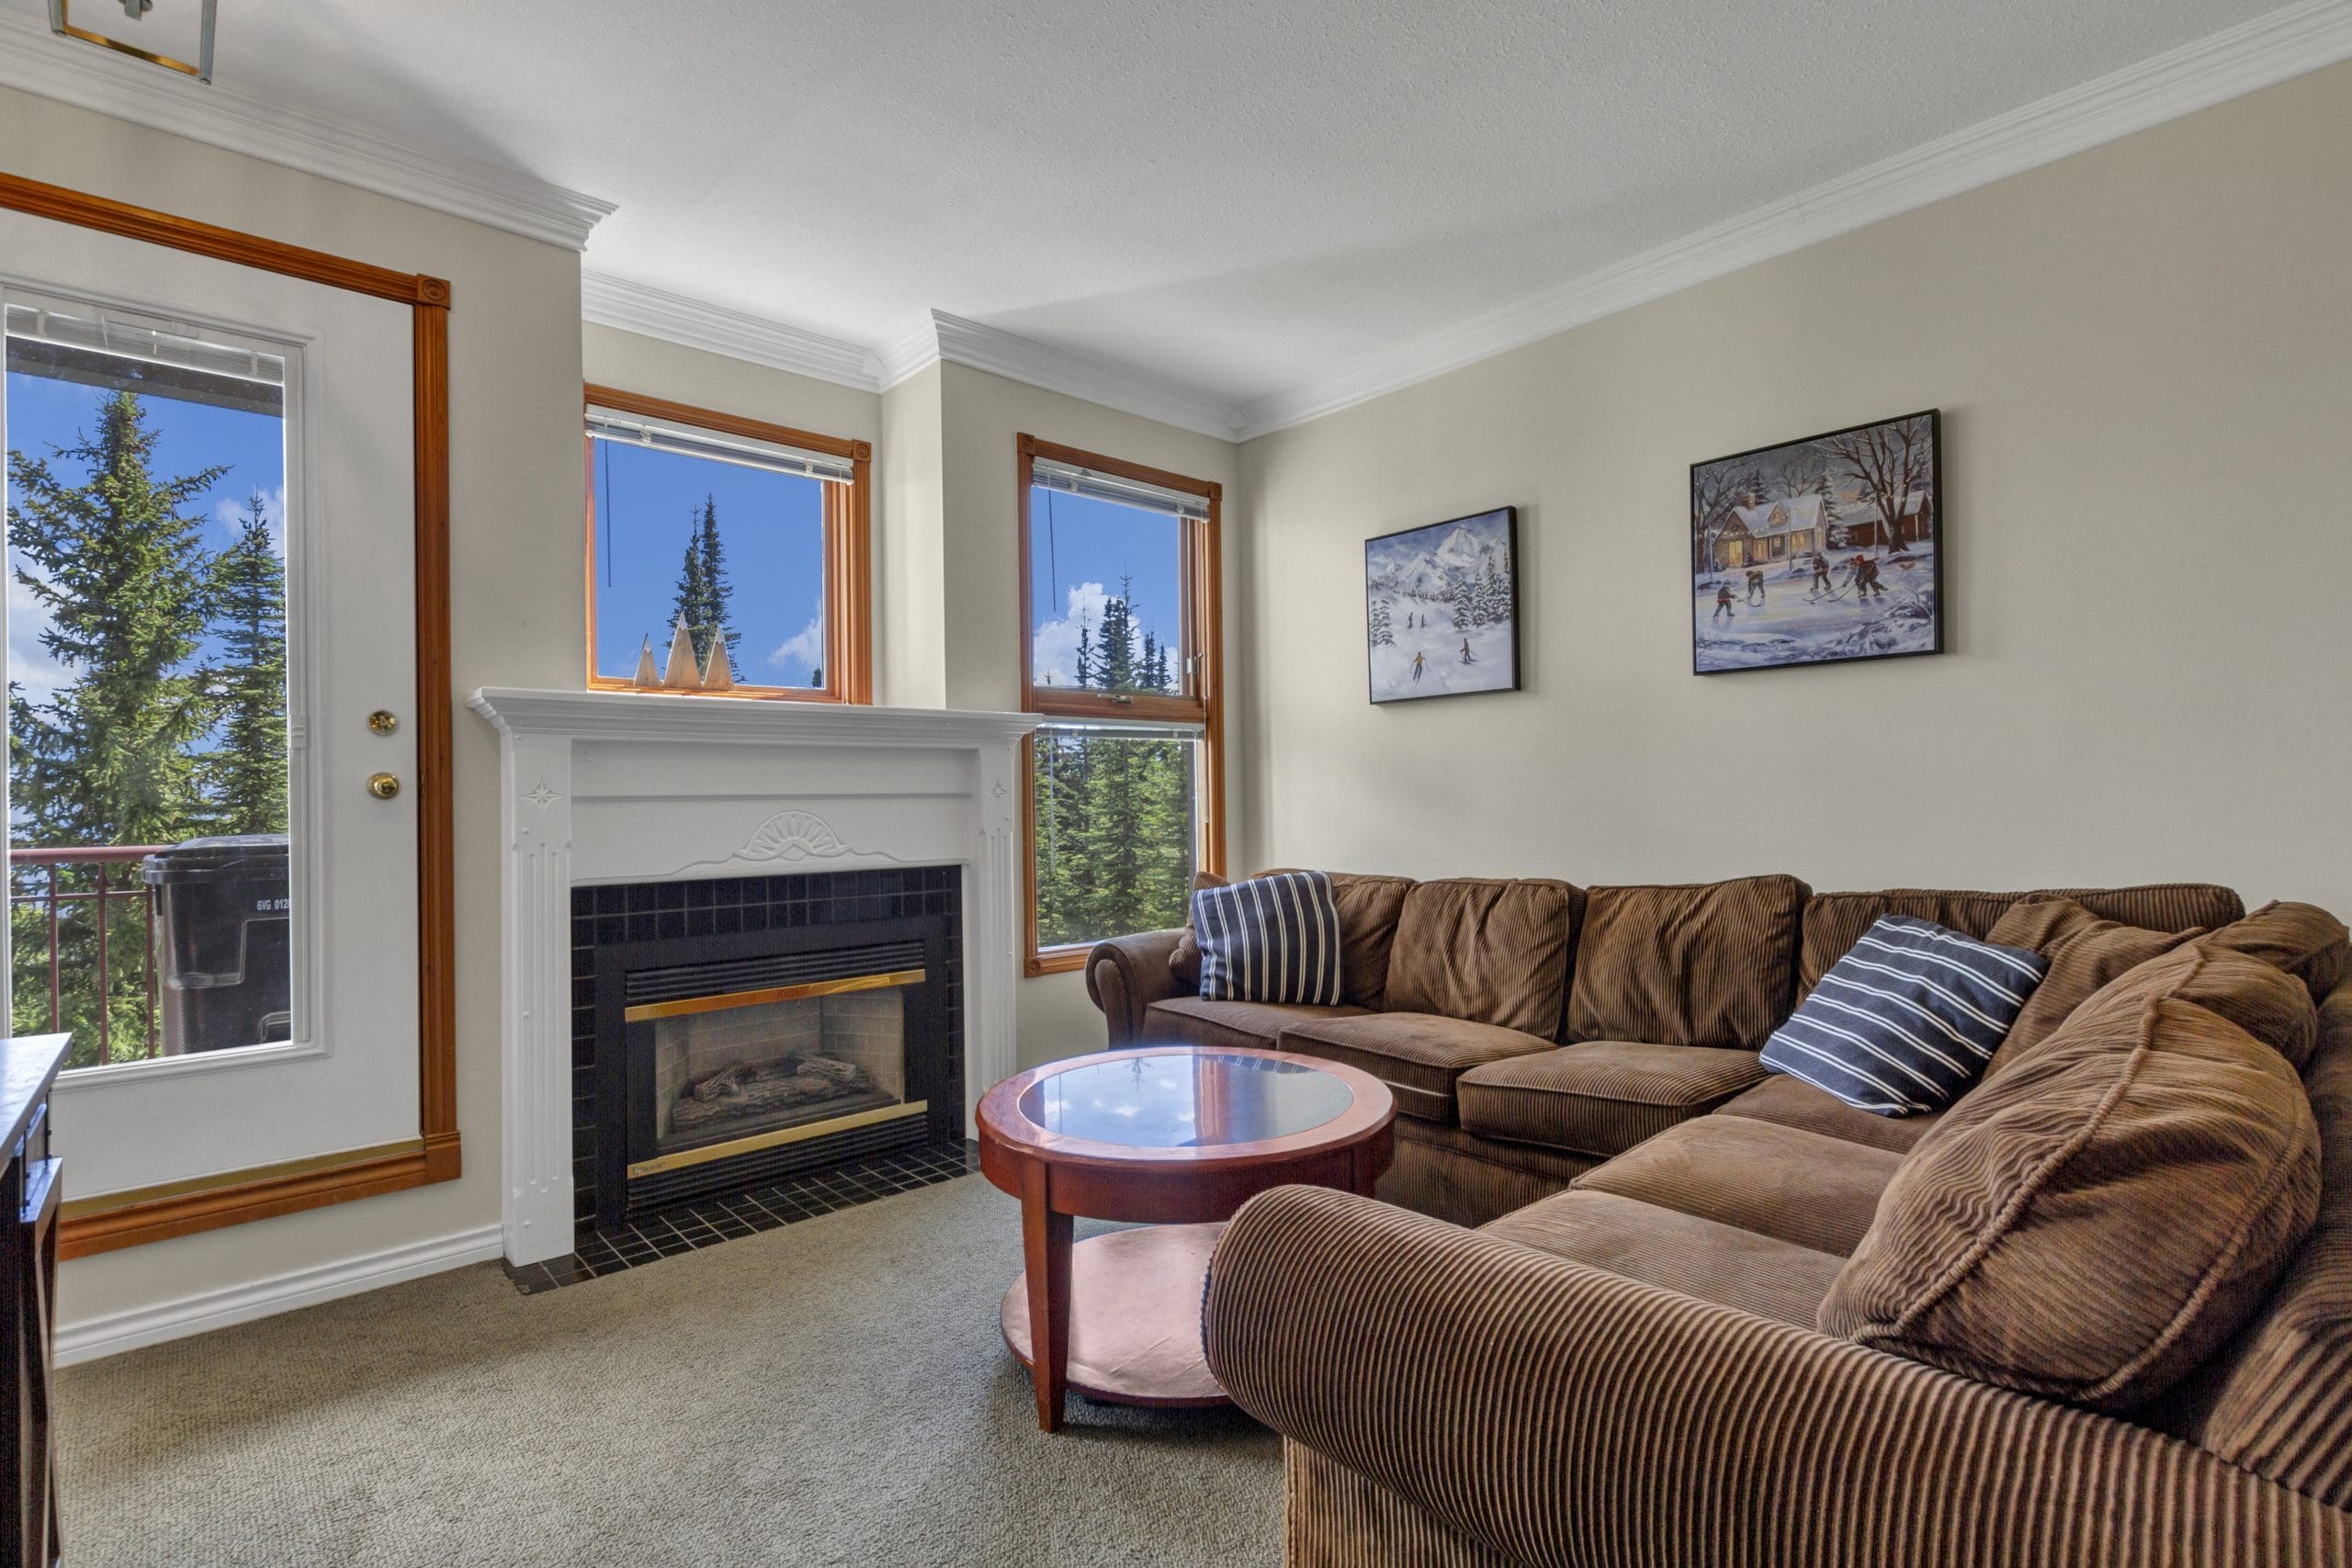 Grandview condo living room with bright open windows and incredible mountain views. Gas fireplace, tv, laundry, outside deck, BBQ and amazing ski-in and out access from the building.